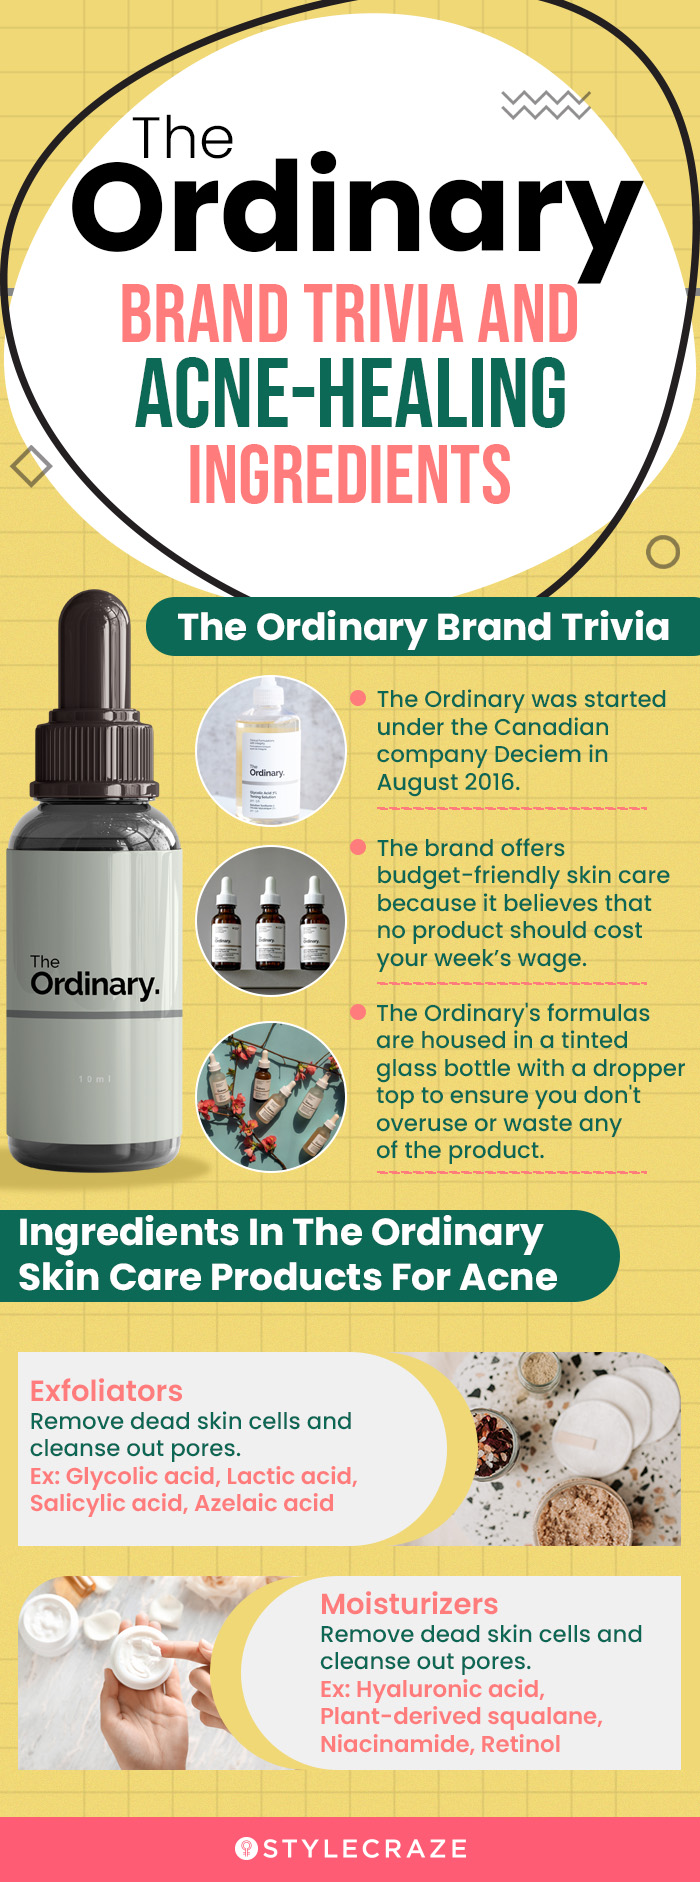 The Ordinary: Brand Trivia And Acne-Healing Ingredients (infographic)